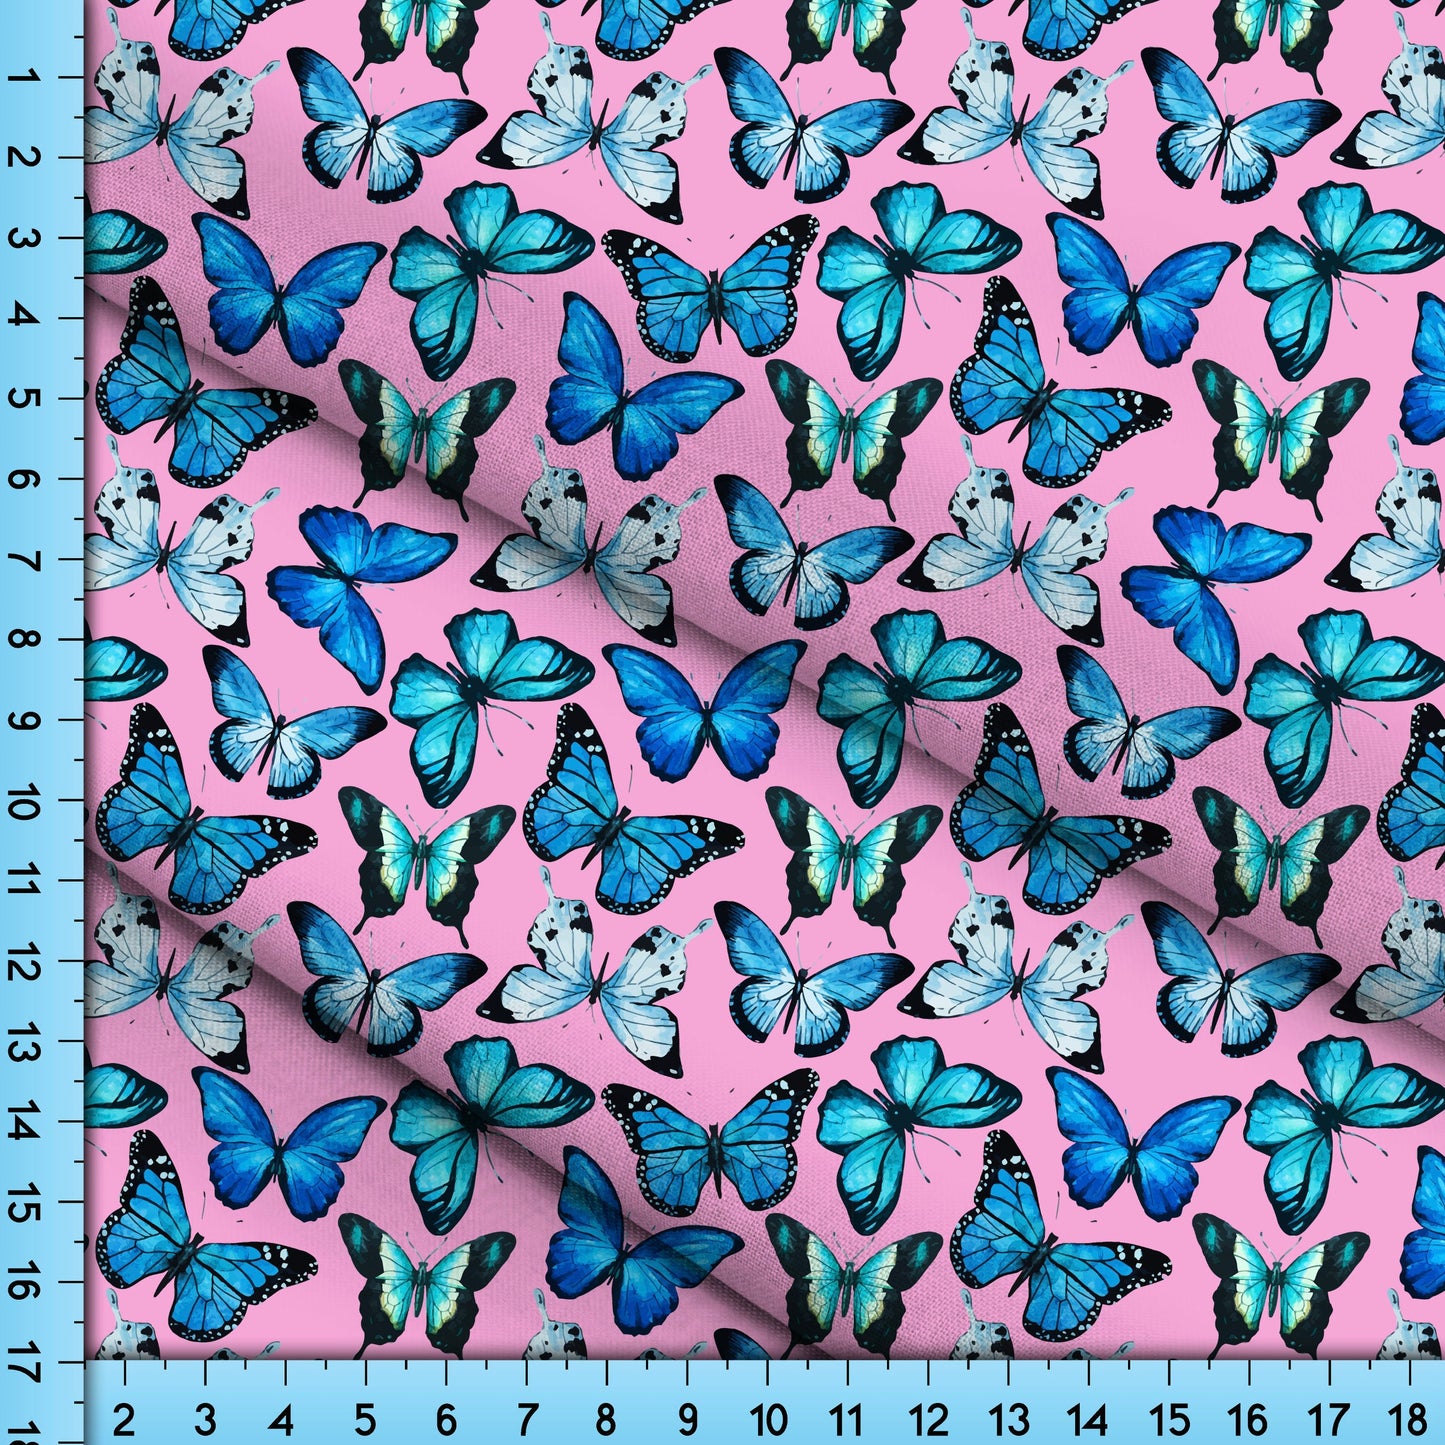 Butterflies Fabric Printed by the Yard, Blue Butterfly on Pink background, Cottagecore Design for Crafts, Upholstery, Clothing